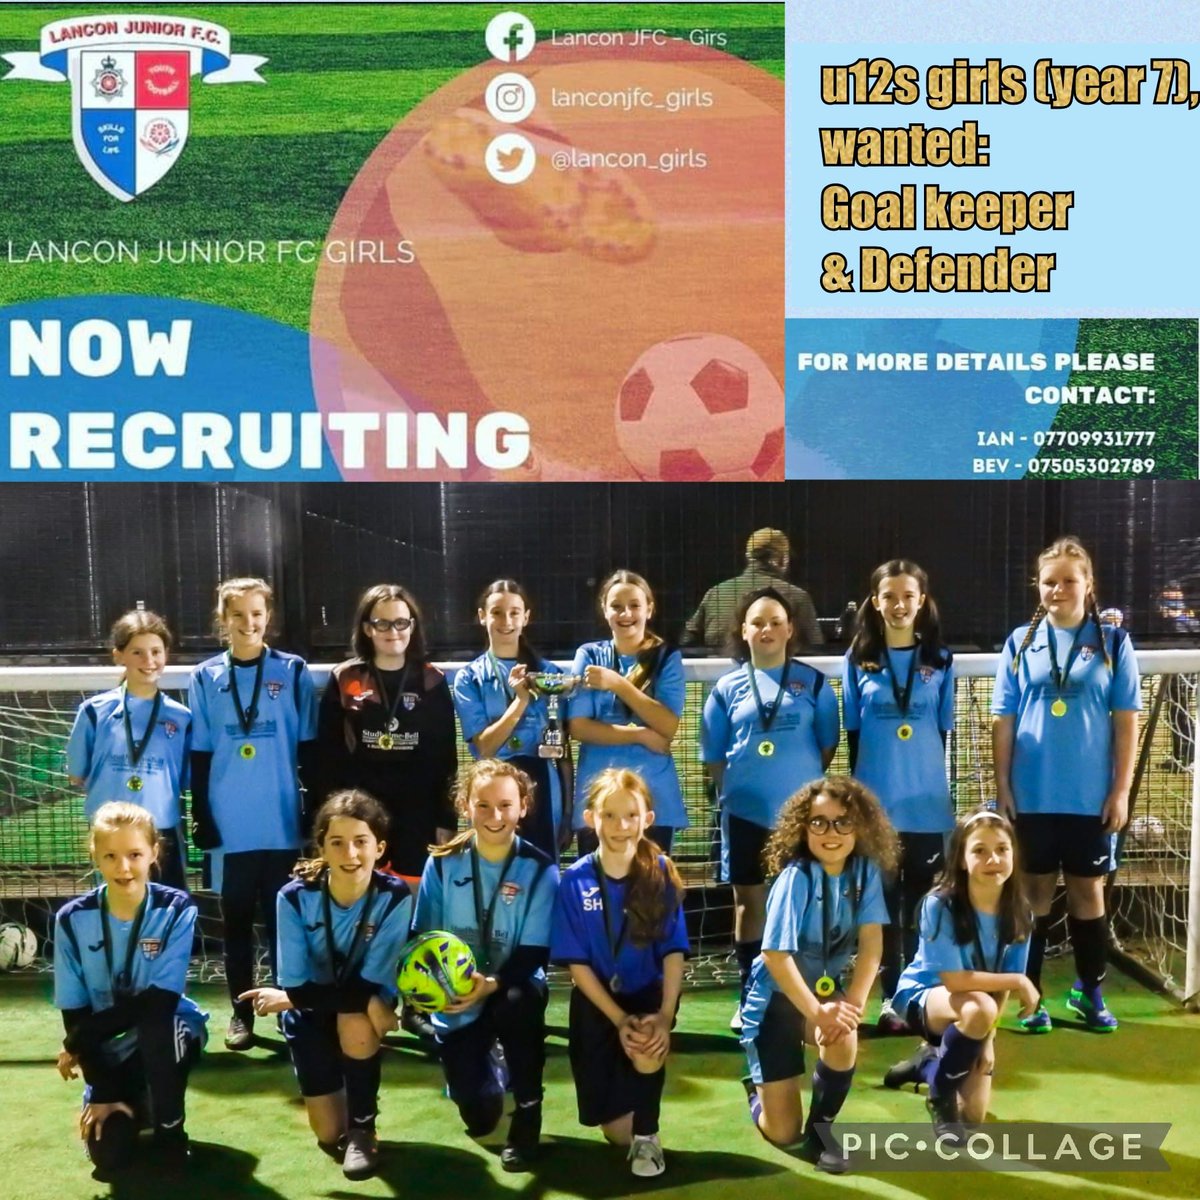 ⚽️Players wanted⚽️
We are looking for a goalkeeper and defender to join our successful u12s (year 7) girls only football team. 
Interested? see advert.
@JfcLancon 
@PdplGirls
@JnrLancs
@LFAWG
@GirlsFootballNw
@mcd_preston
@charleyy_96
@studholmebell
@FootballGrf
#lanconforlife